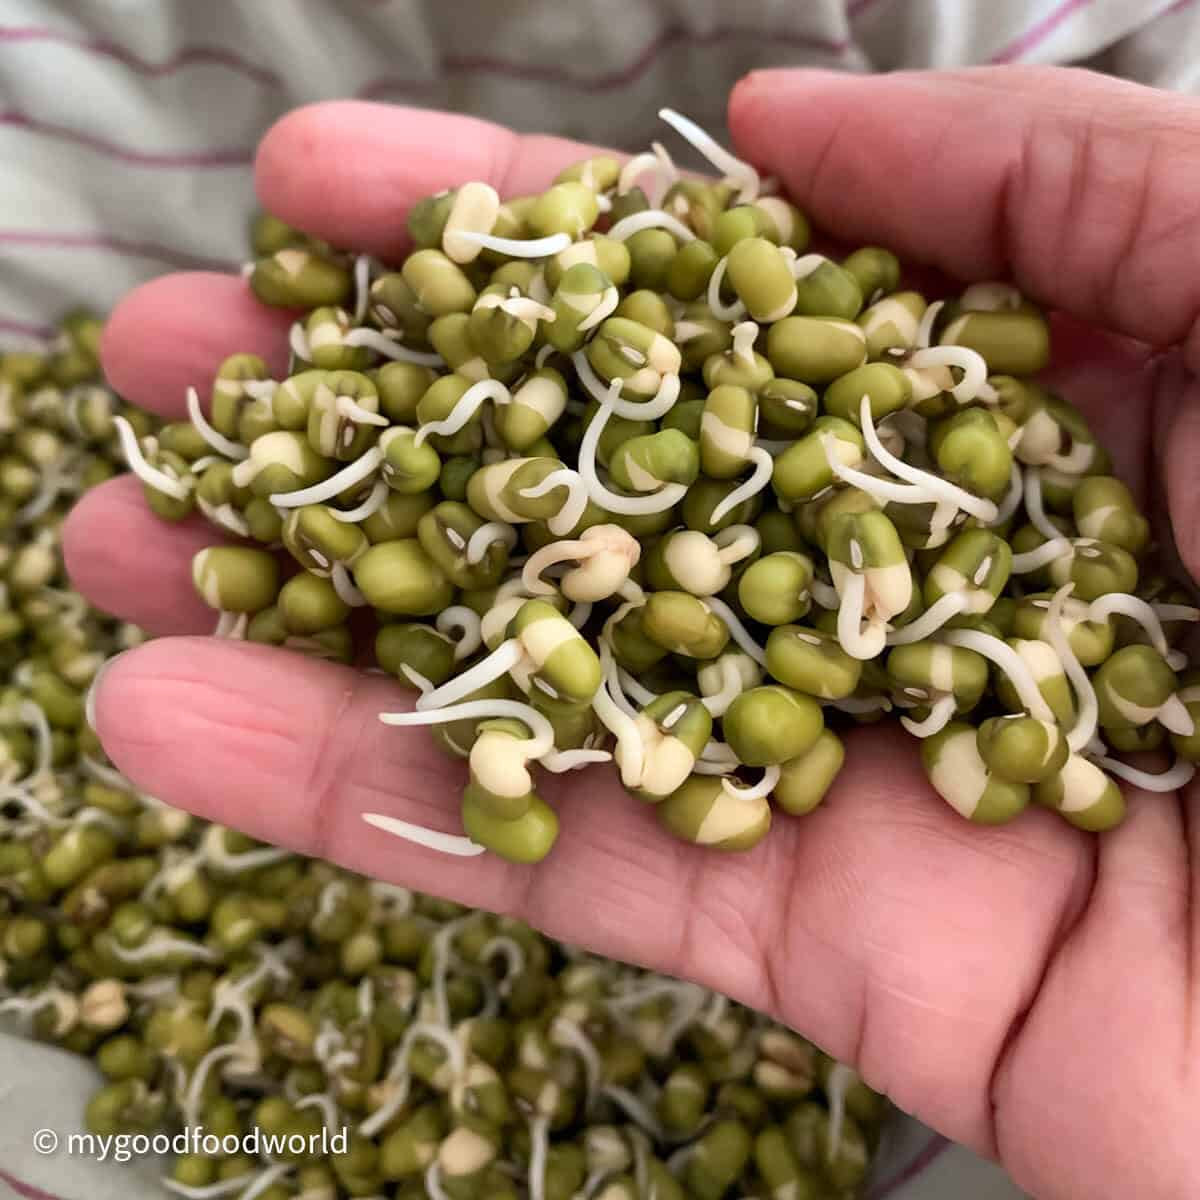 Mung beans that have sprouted for 48 hours are held by a person in their hand.